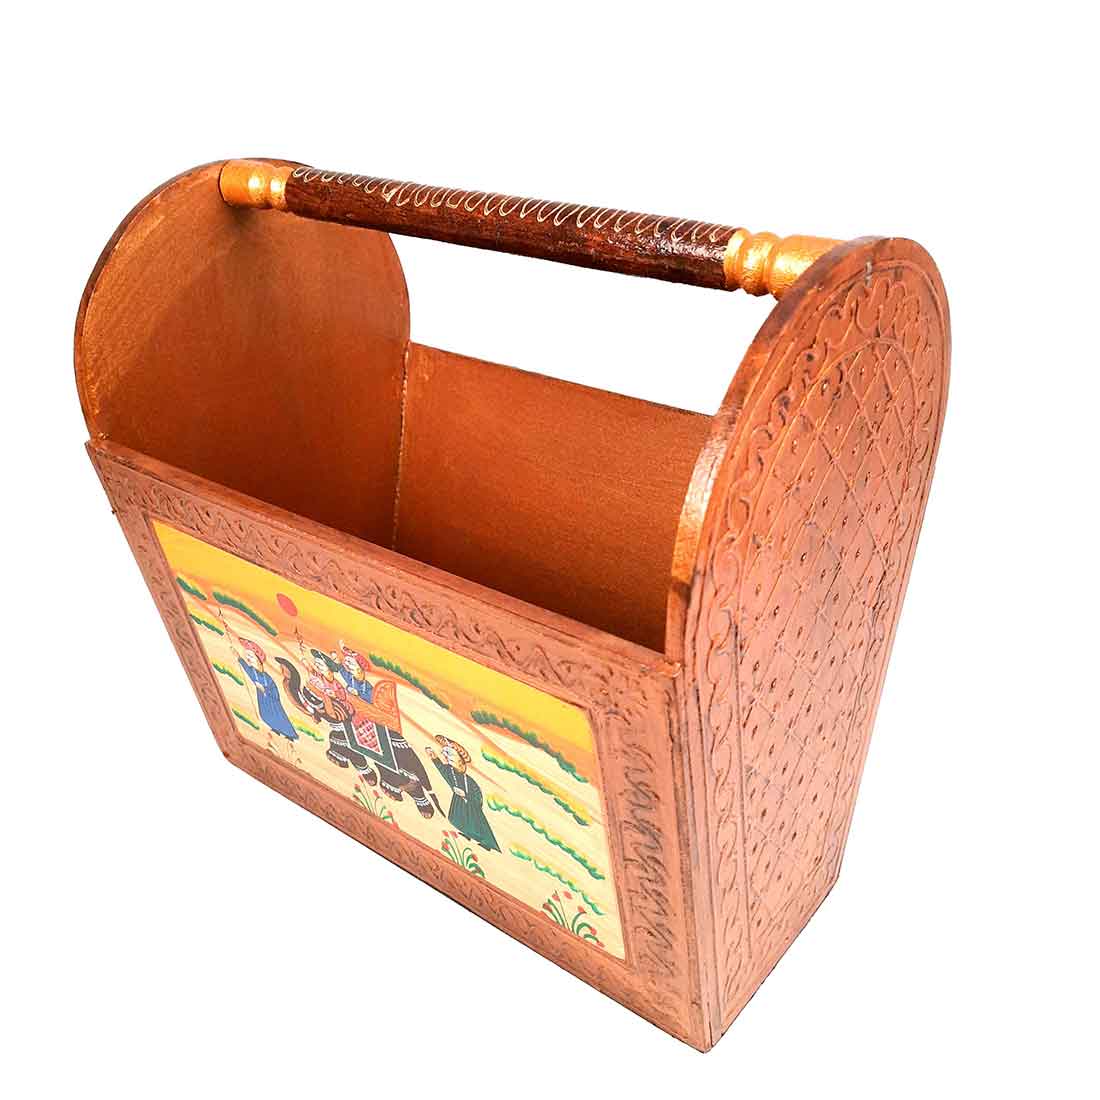 Magazine Holder | Newspaper Stand Holders| Wooden Books Organizer - For Home Decor, Living Room, Table & Desk Organising, Office & Gifts - 12 Inch